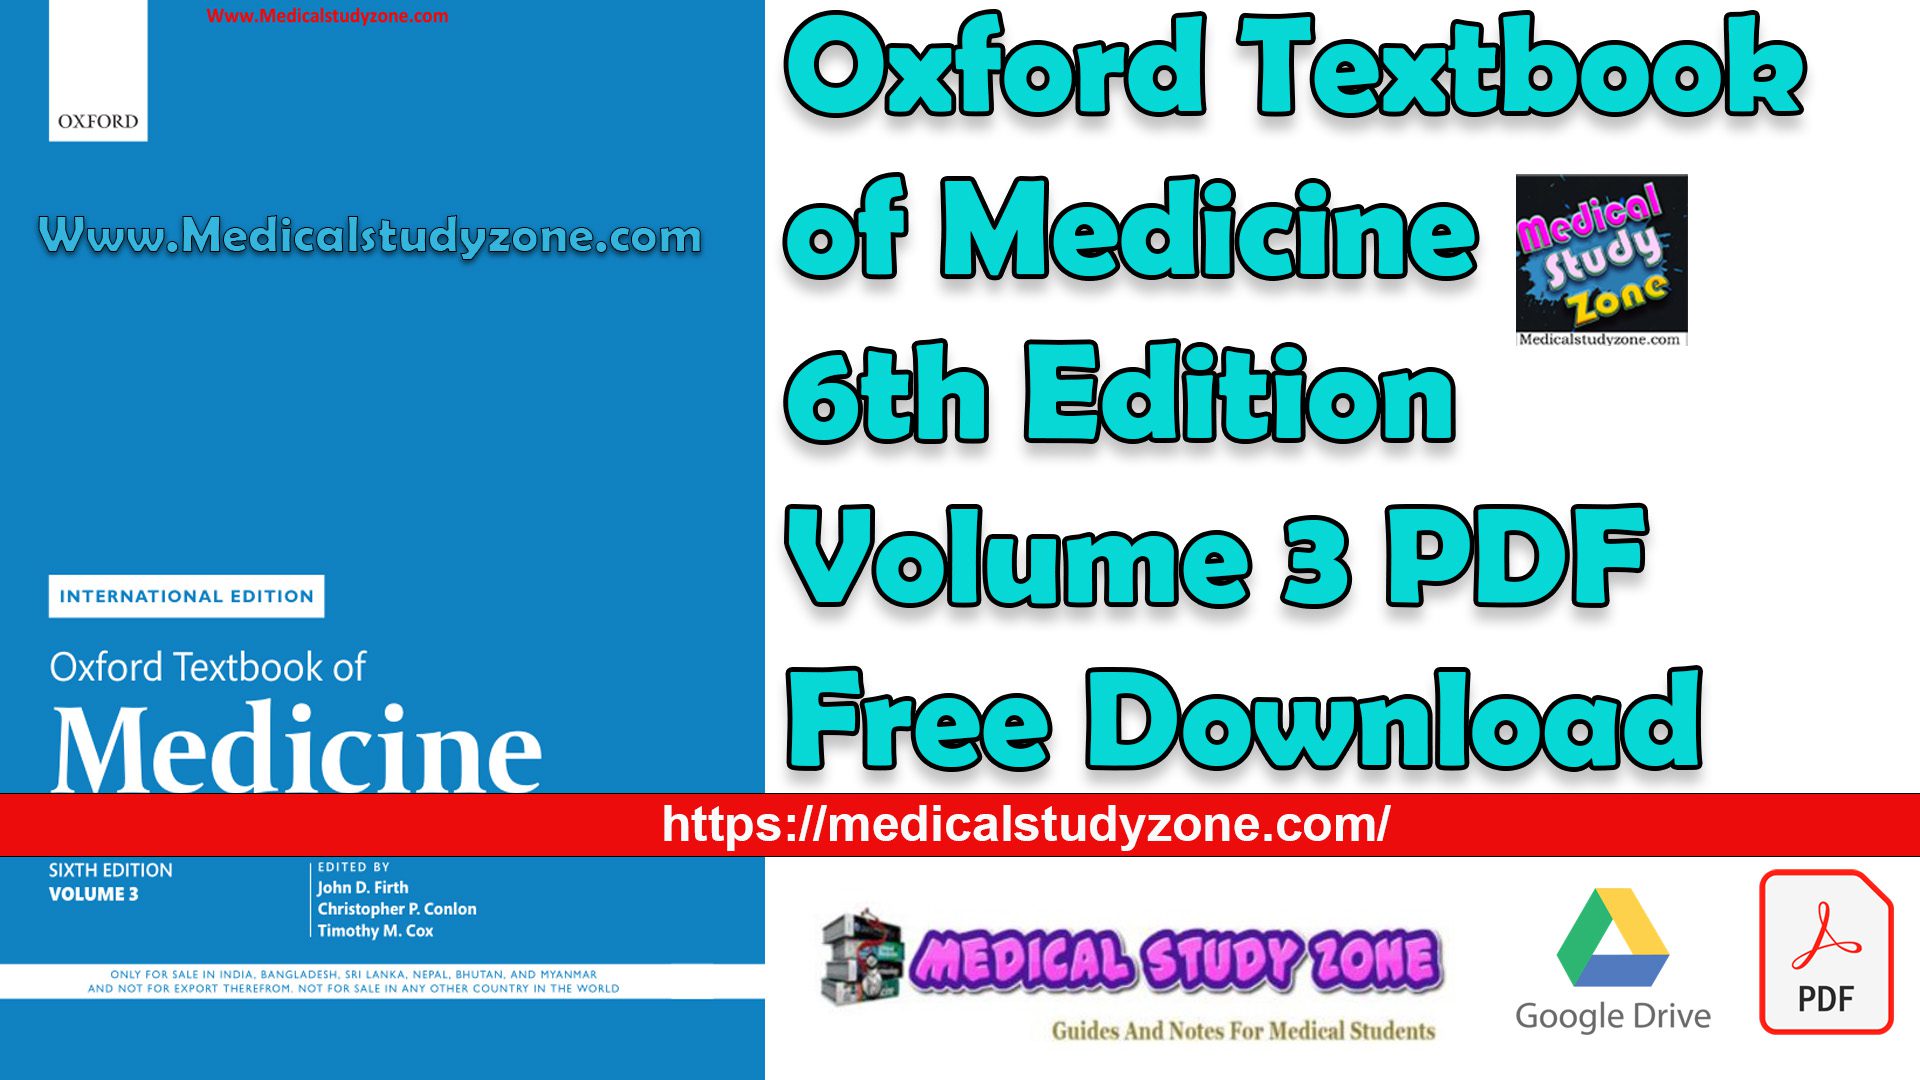 Oxford Textbook of Medicine 6th Edition Volume 3 PDF Free Download